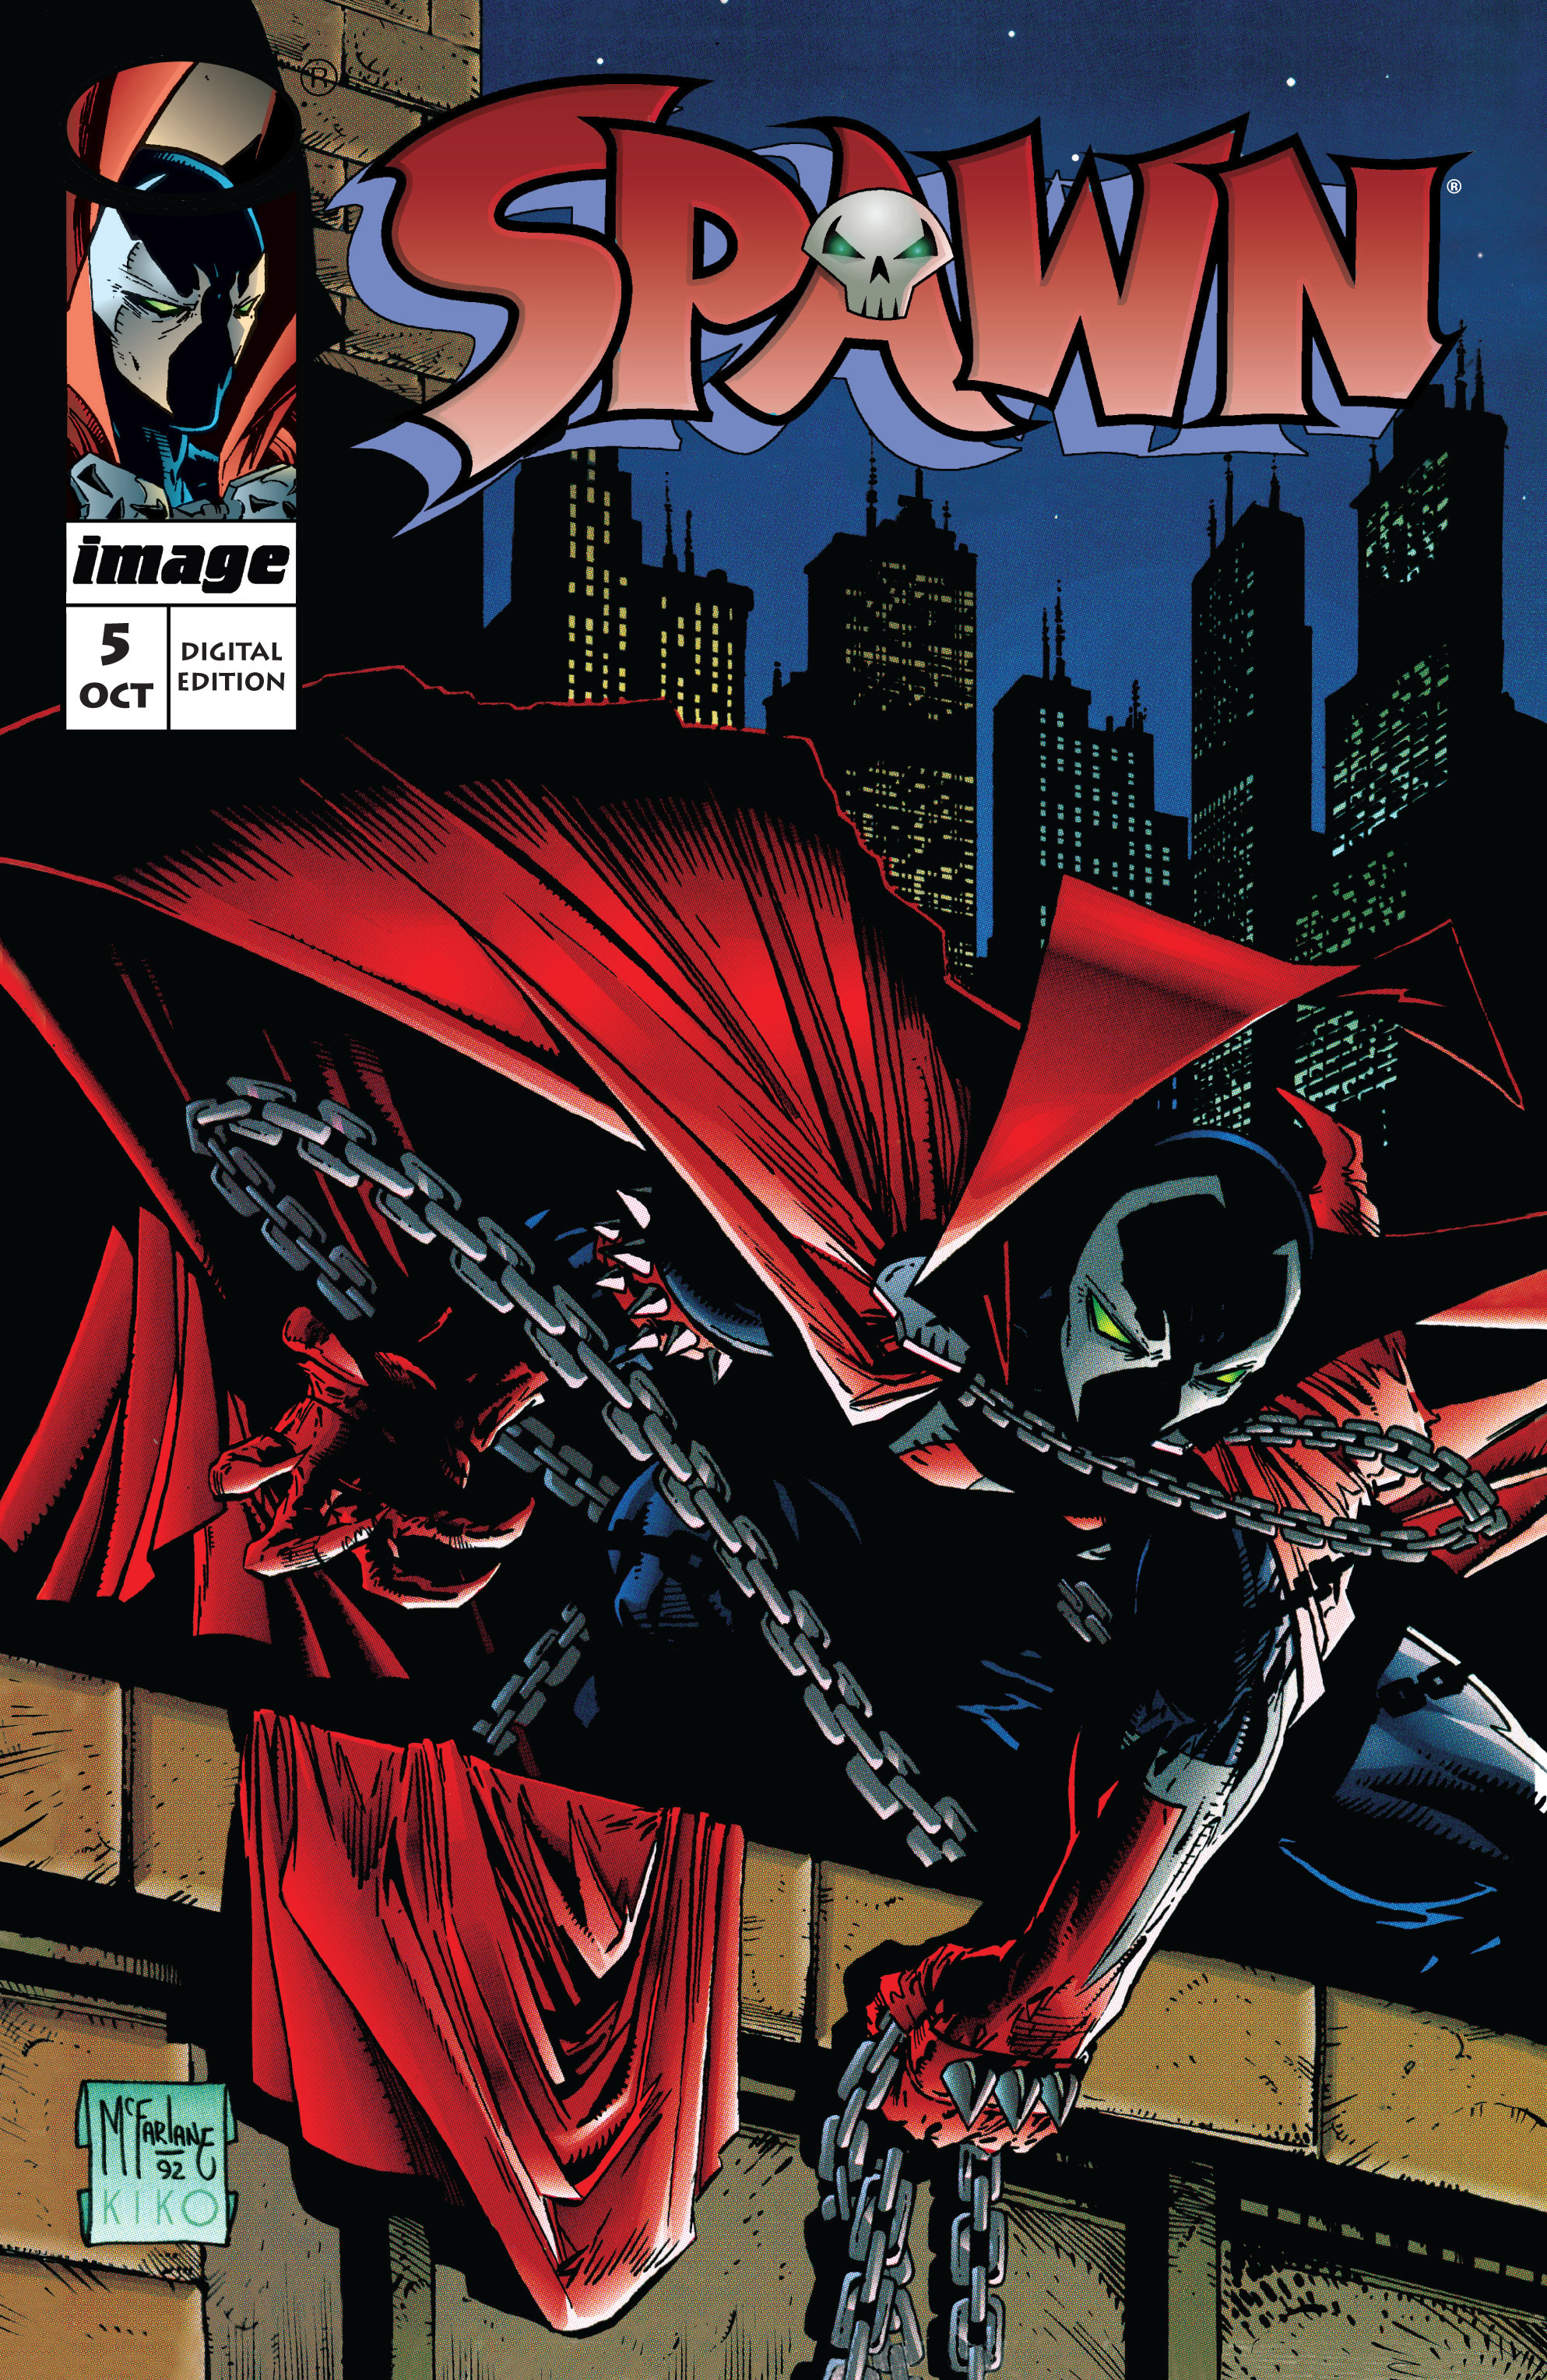 Read online Spawn comic -  Issue #5 - 1